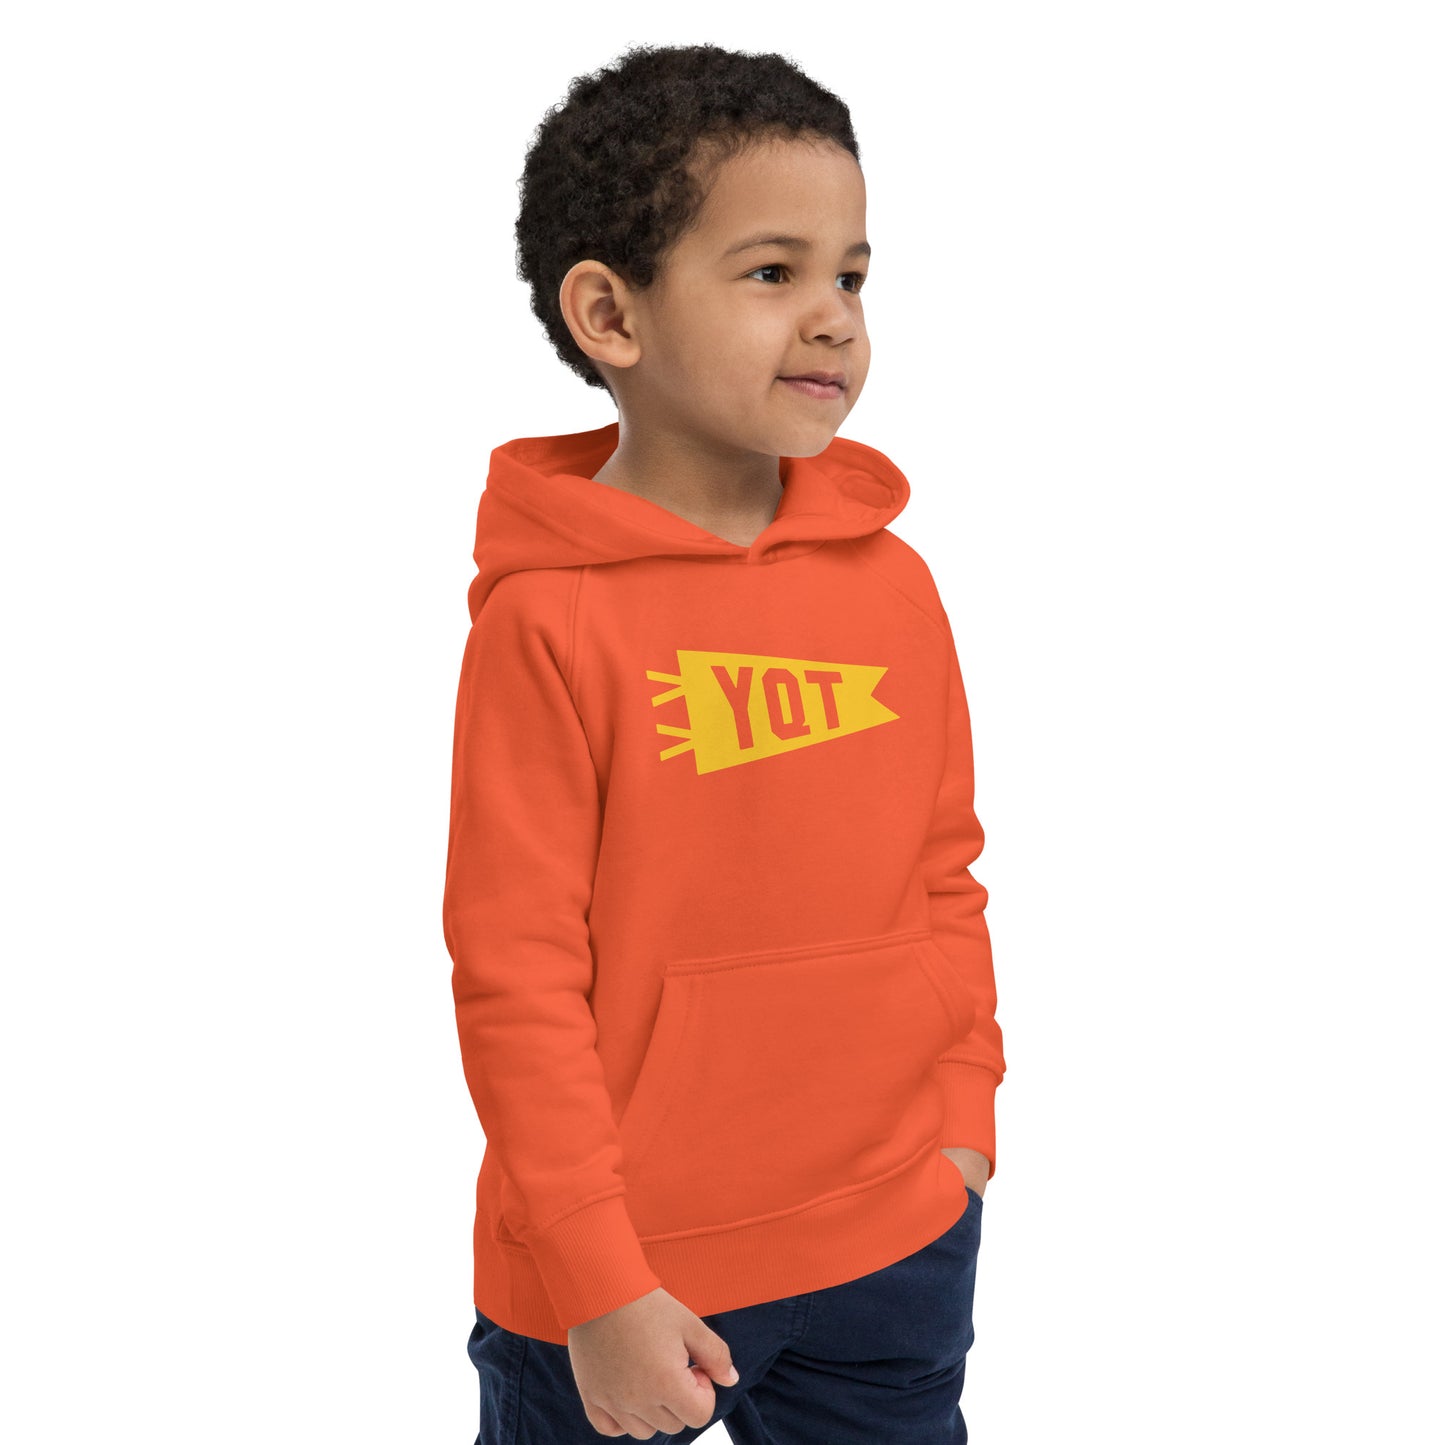 Kid's Sustainable Hoodie - Yellow Graphic • YQT Thunder Bay • YHM Designs - Image 13